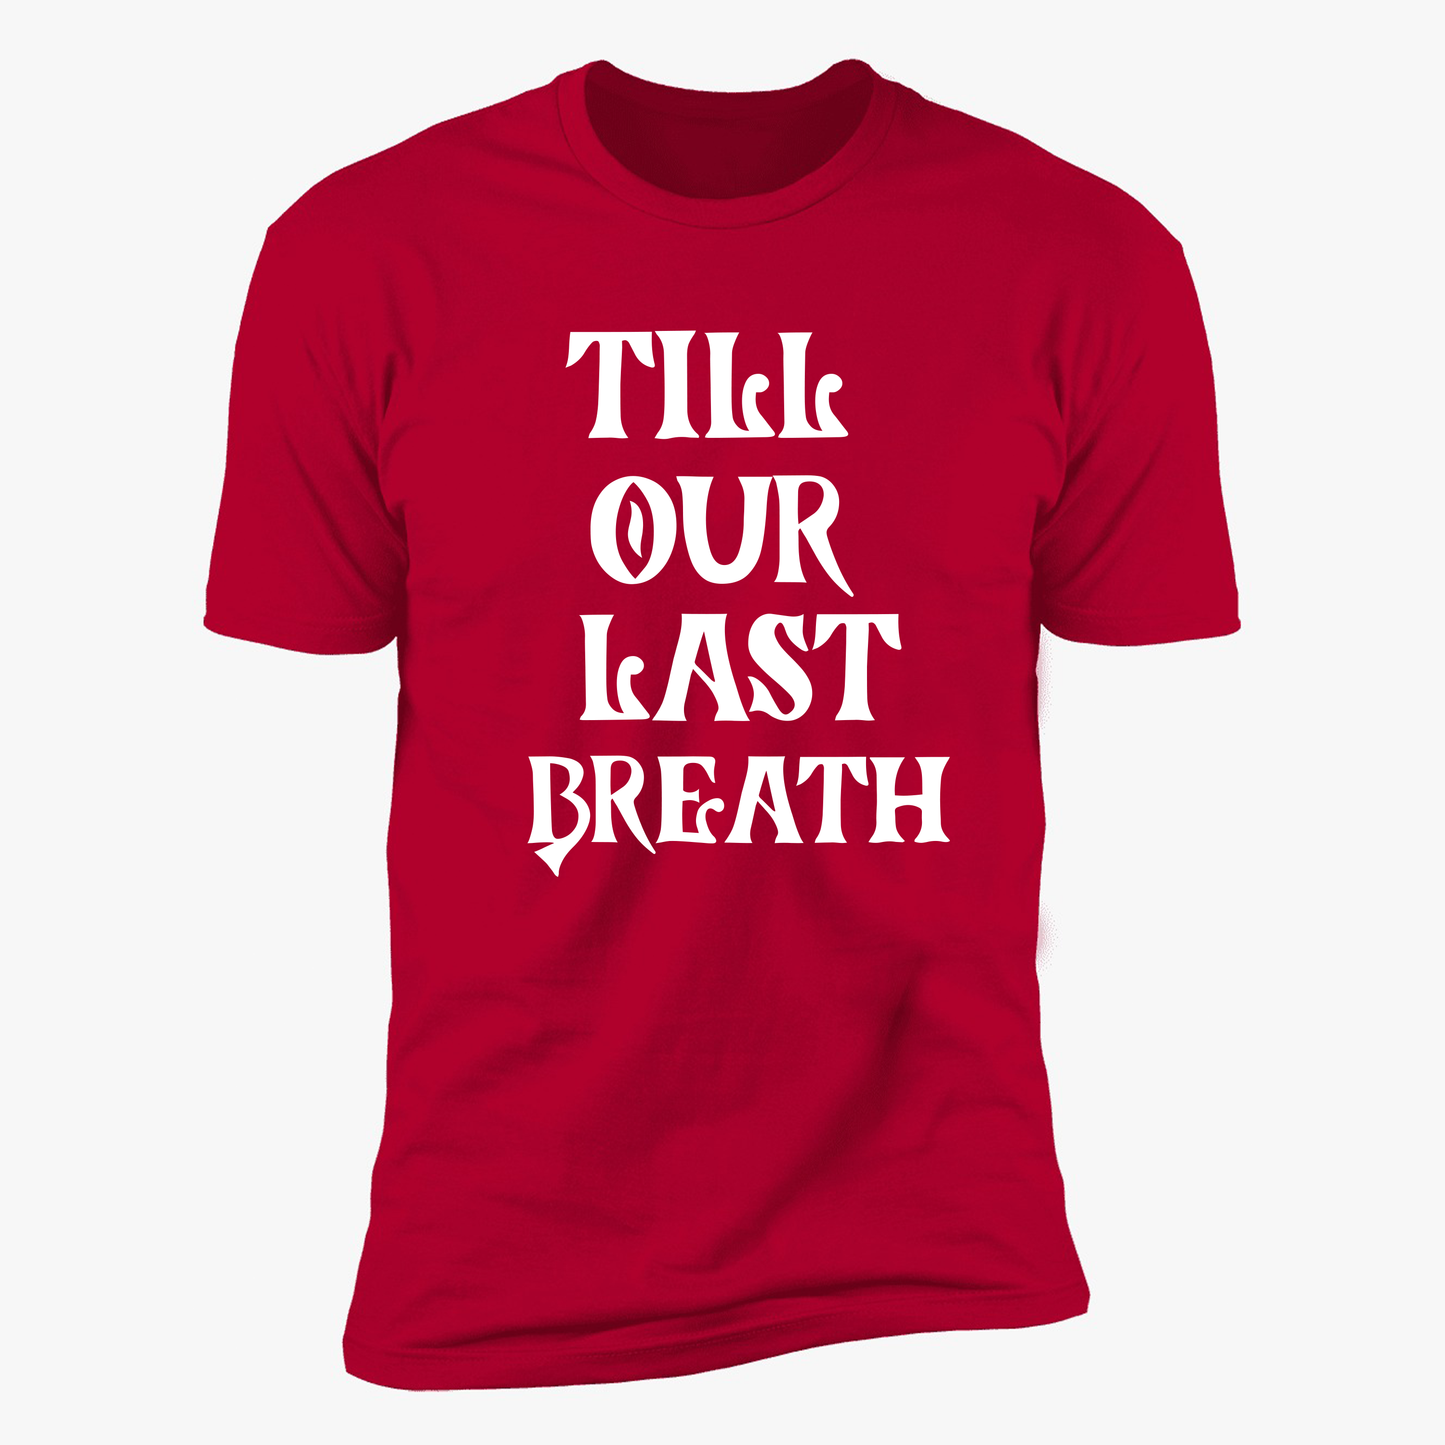 From Our First Kiss Till Our Last Breath Anniversary Tees